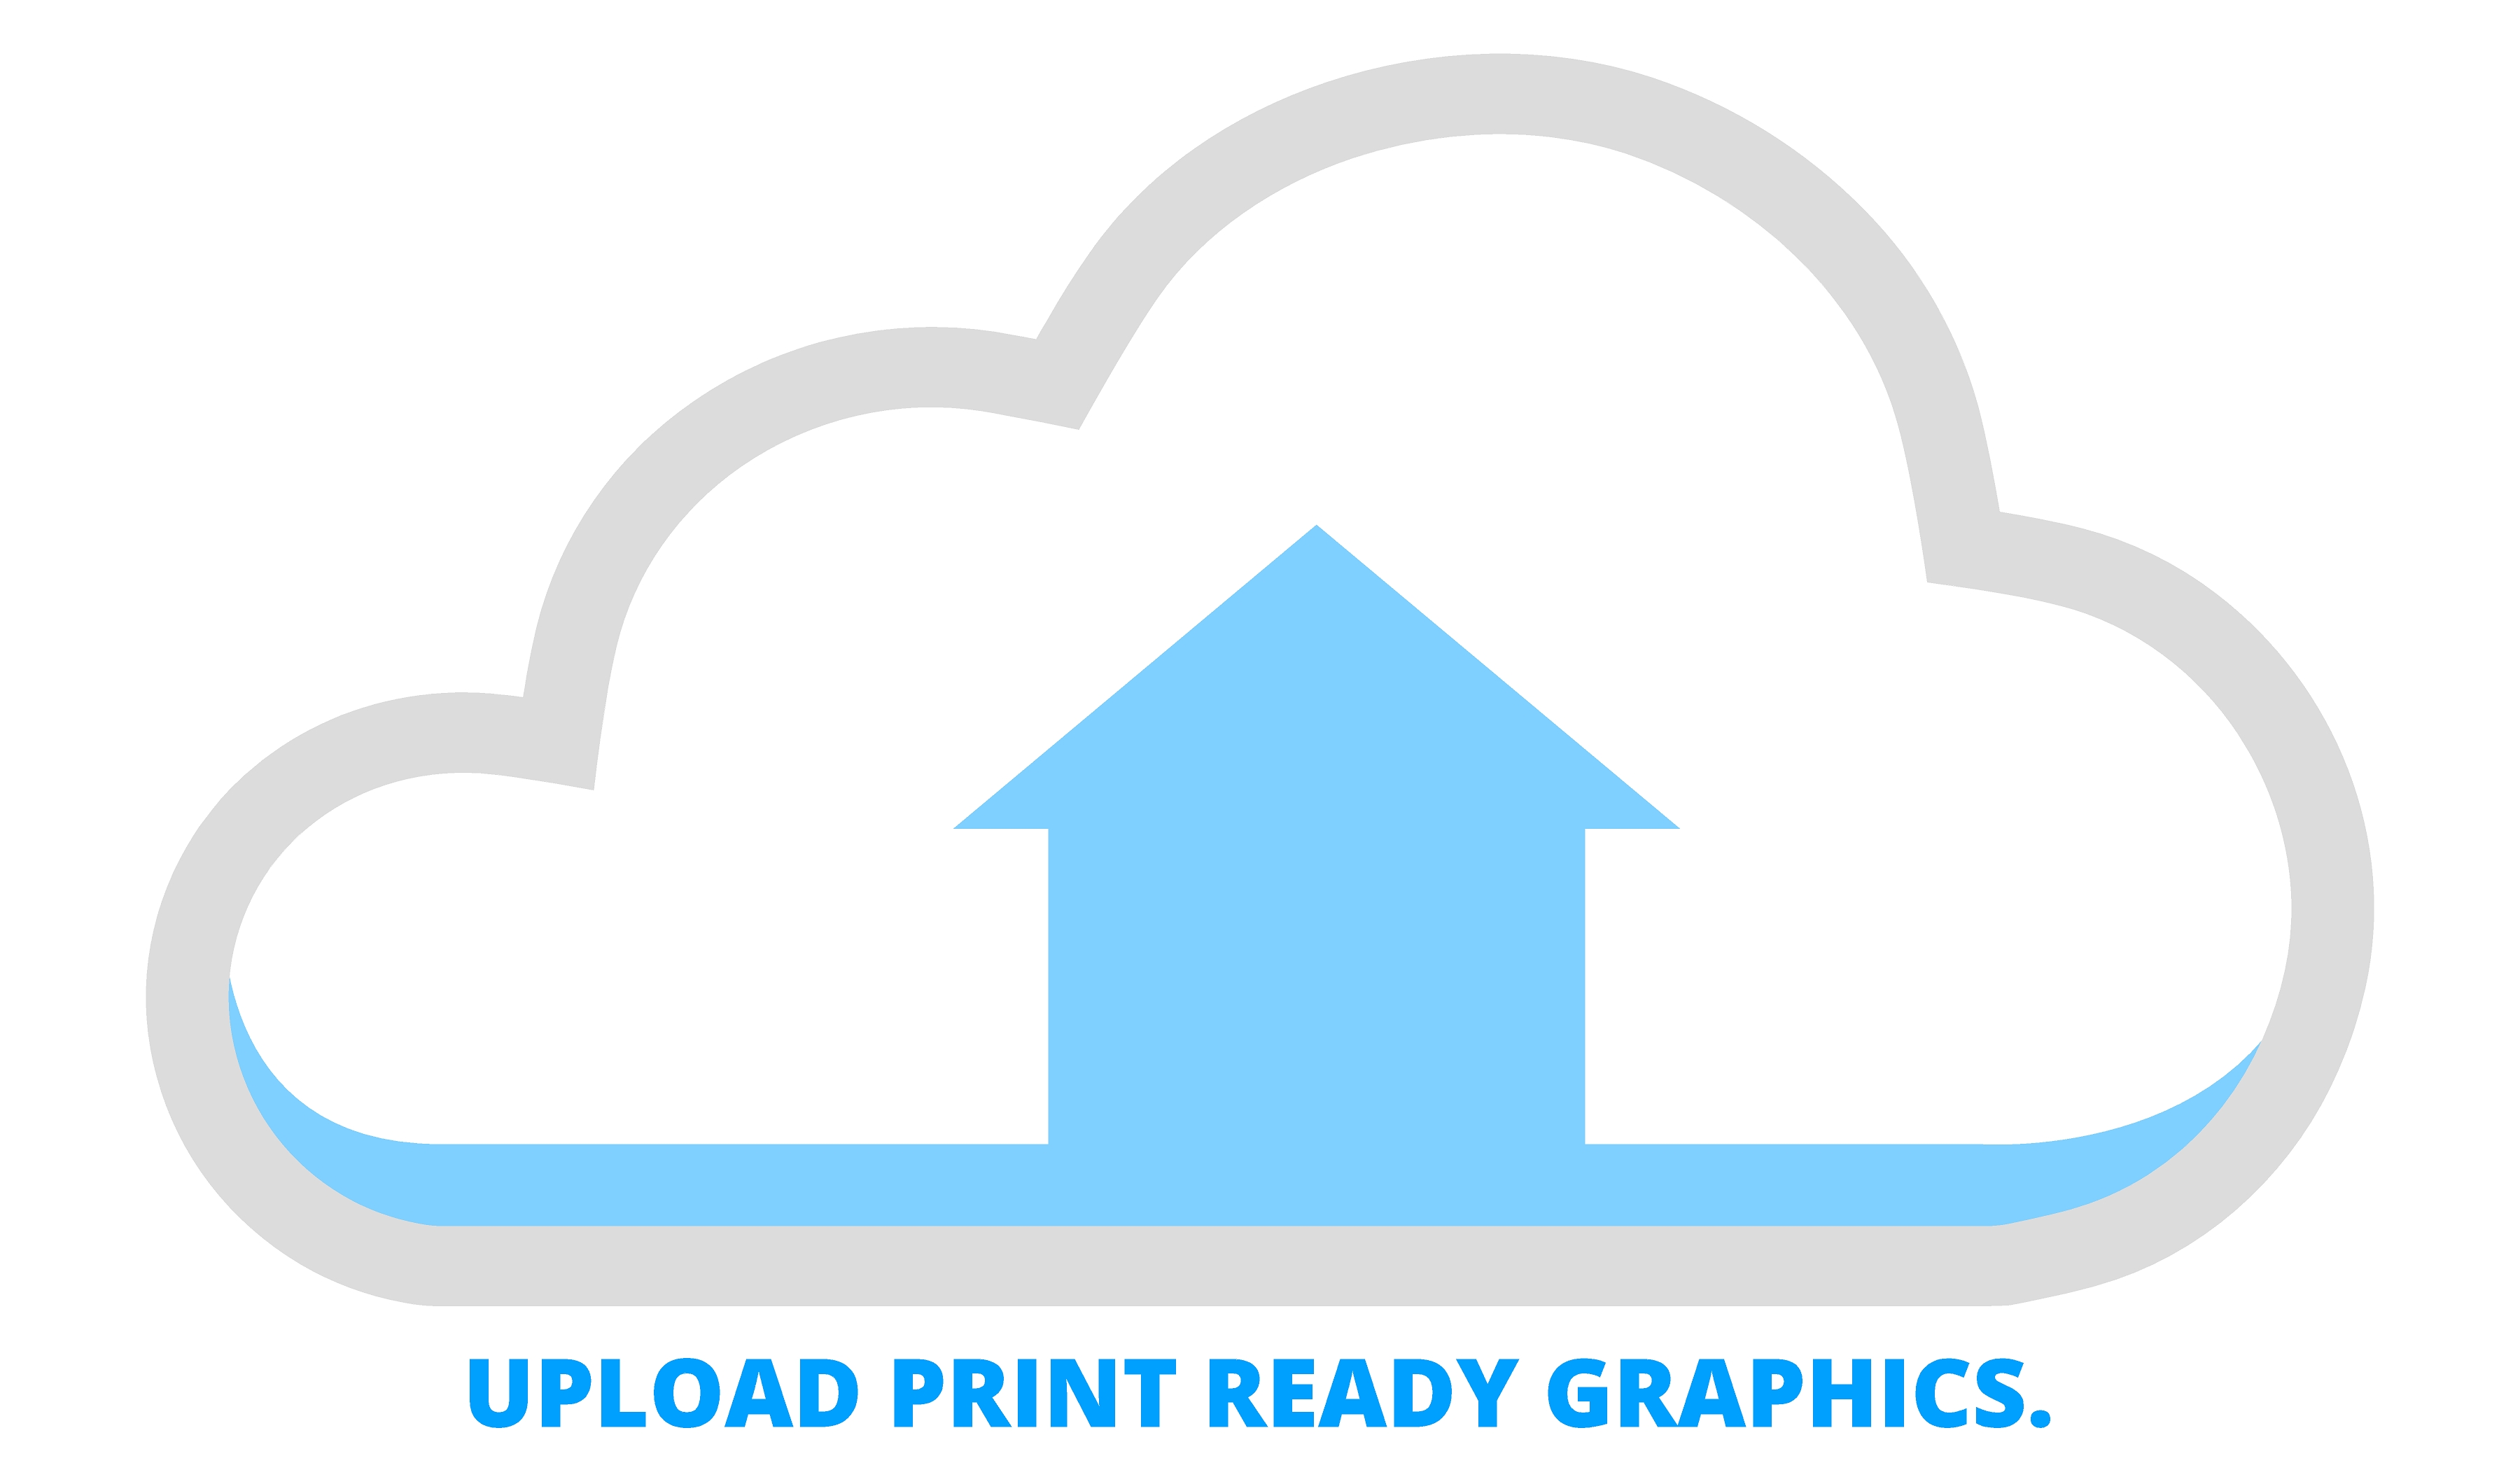 Upload print ready graphics here.